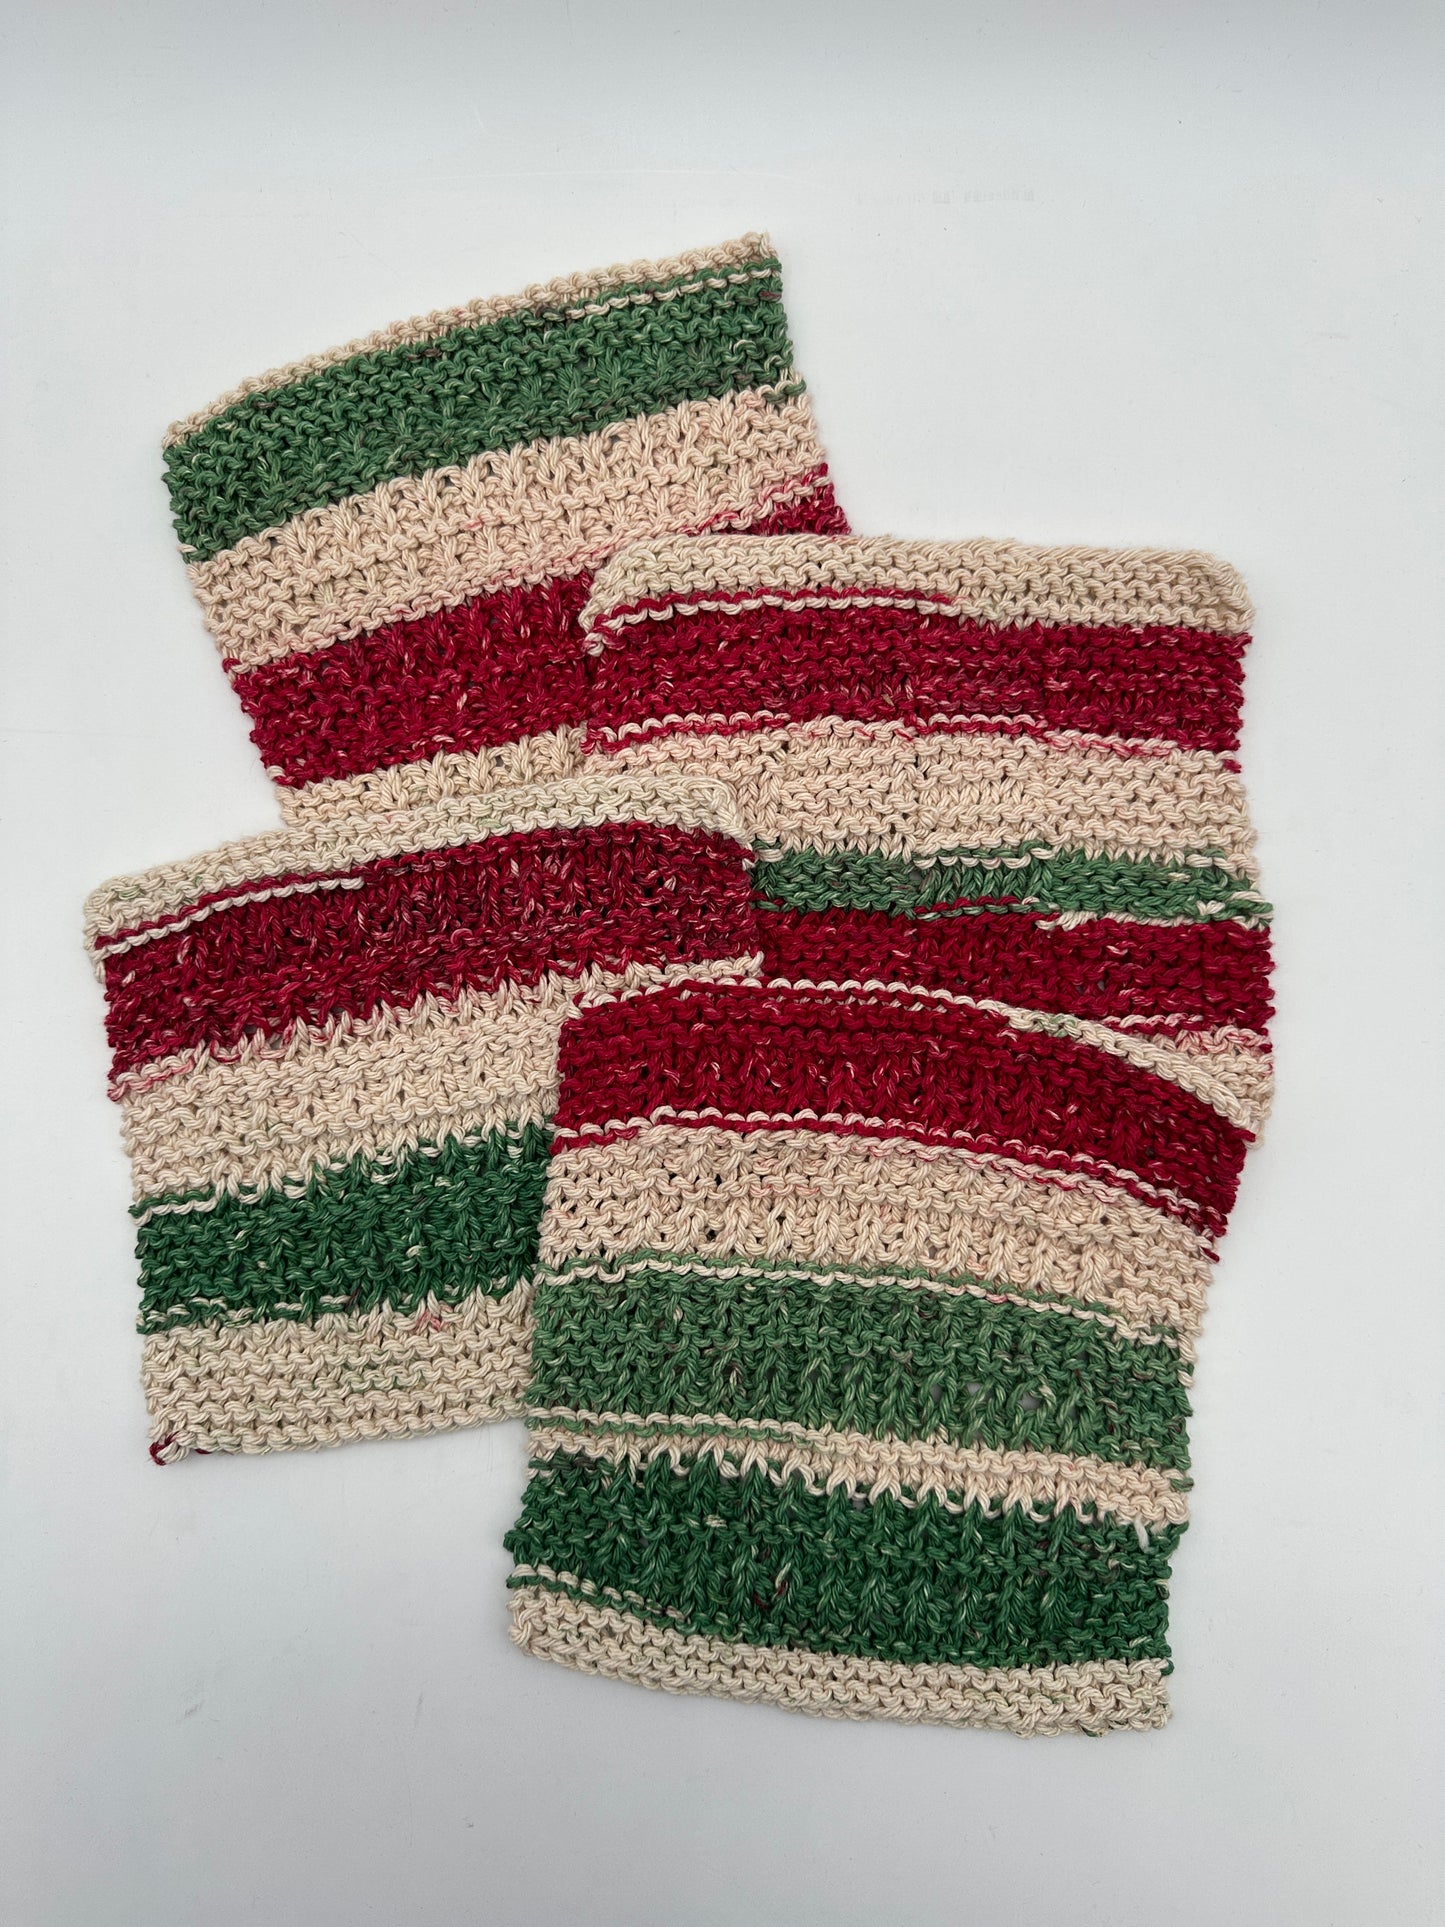 Hand-Knitted Dishcloth, new